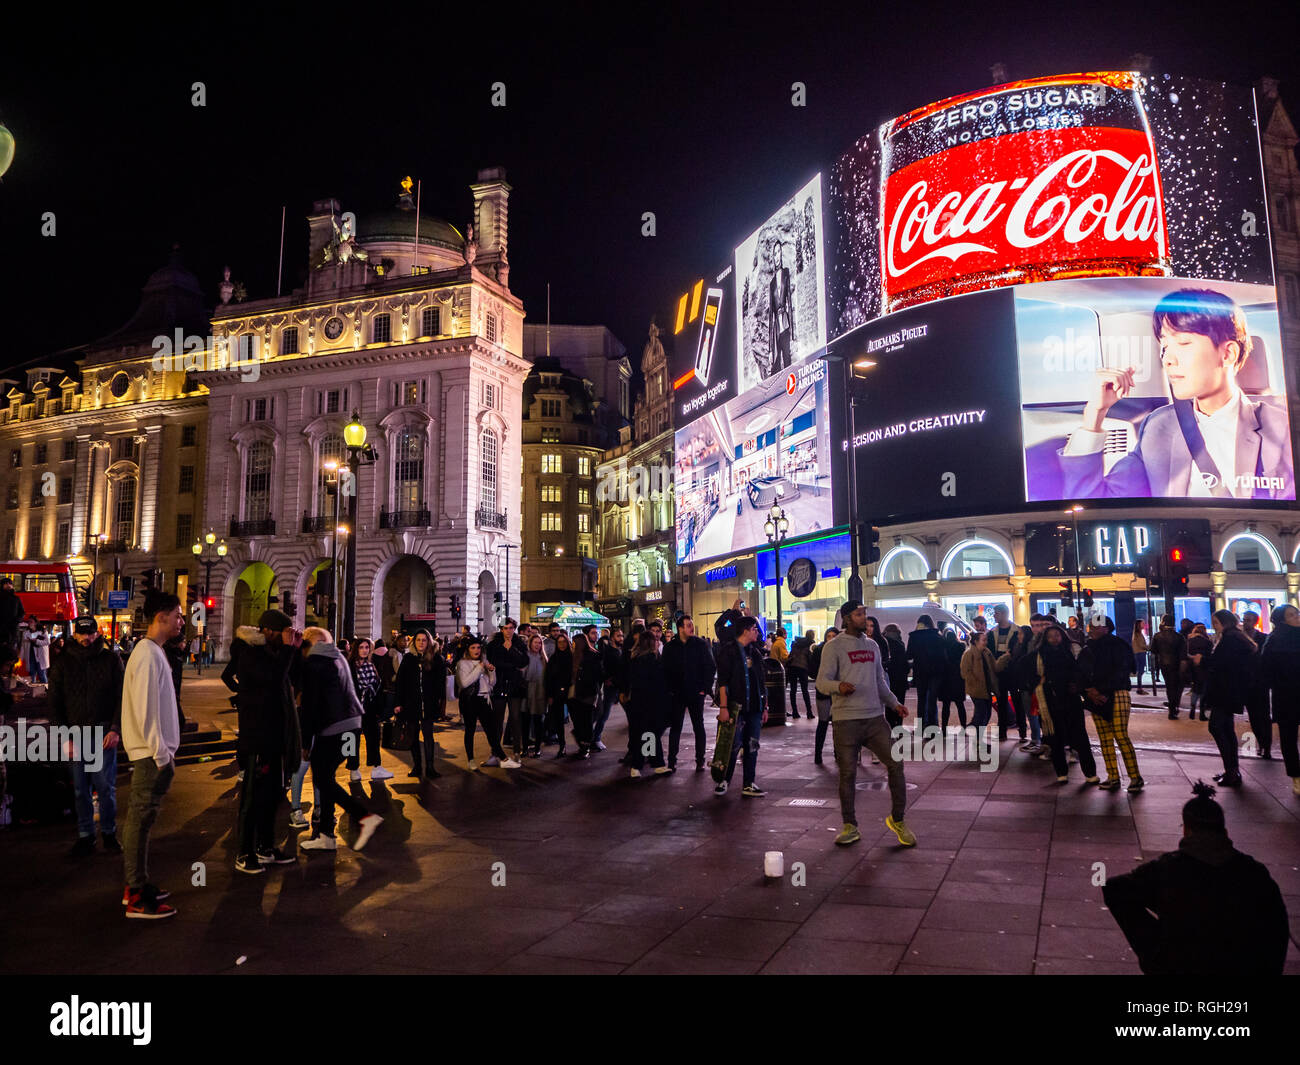 London,UK - January 25th 2019: Piccadilly Circus in London at night Stock Photo